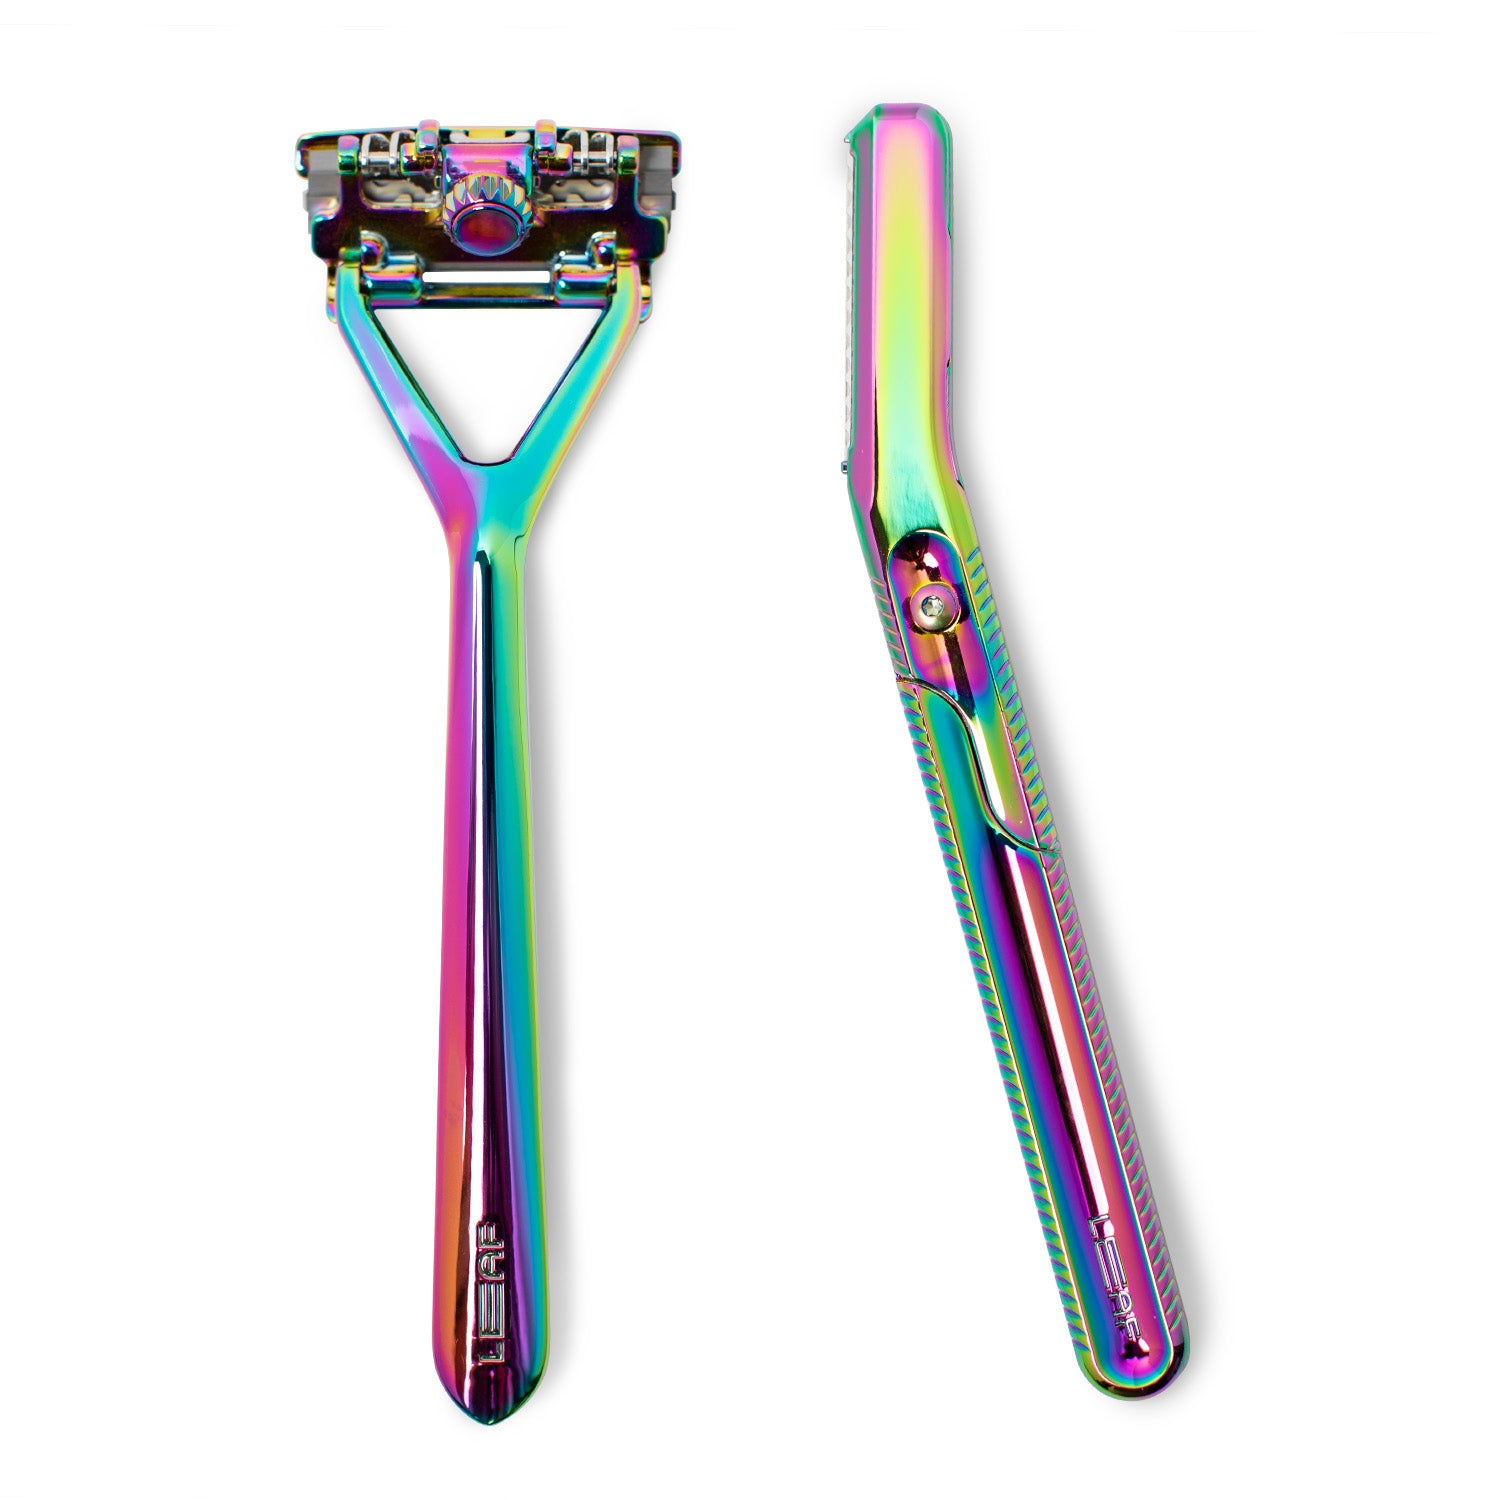 This image contains Leaf Shave brand Leaf and Dermaplaner razors on a white background, in the finish called Prism